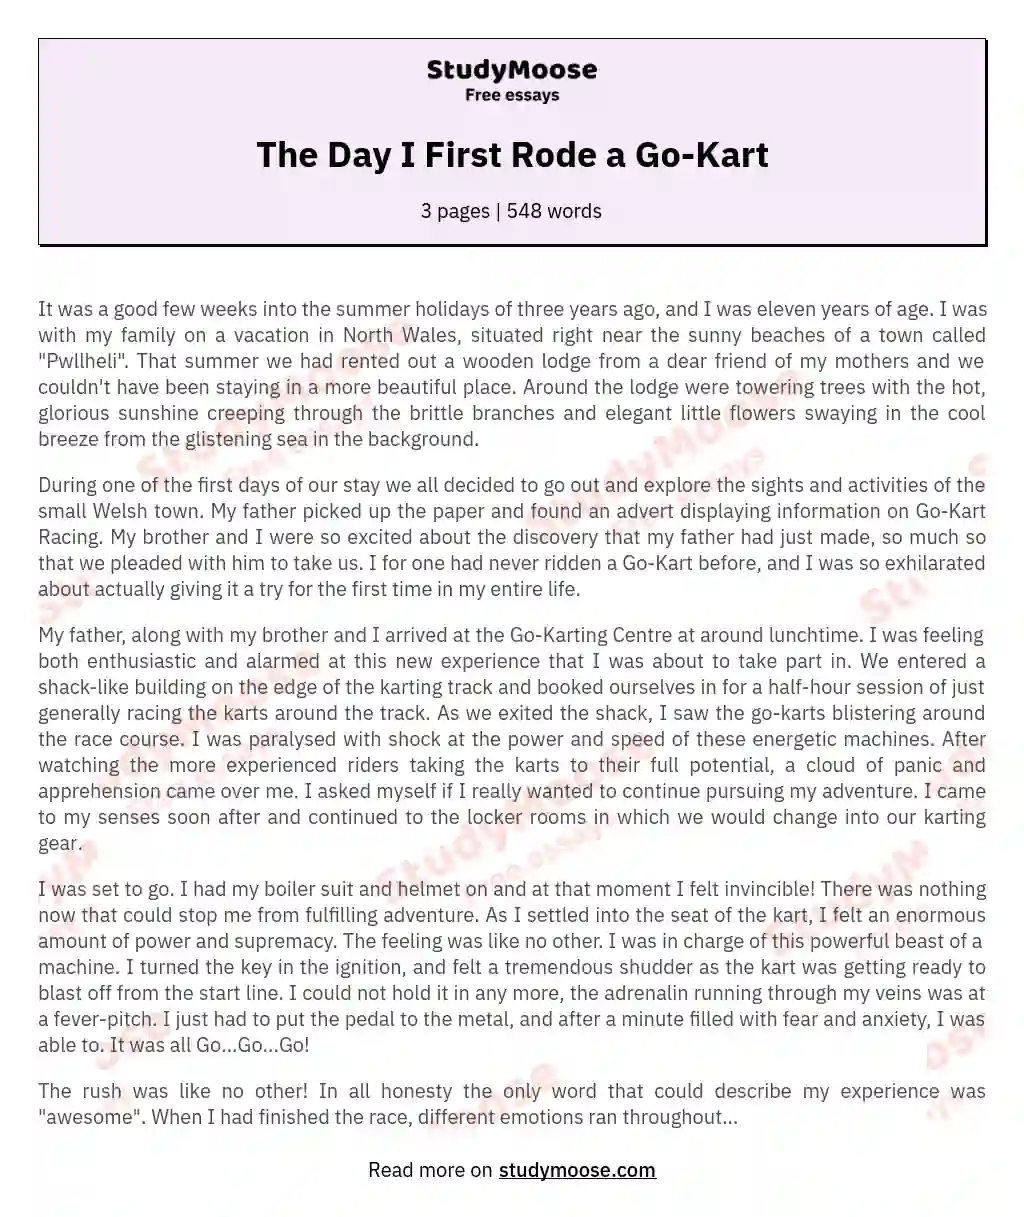 The Day I First Rode a Go-Kart essay